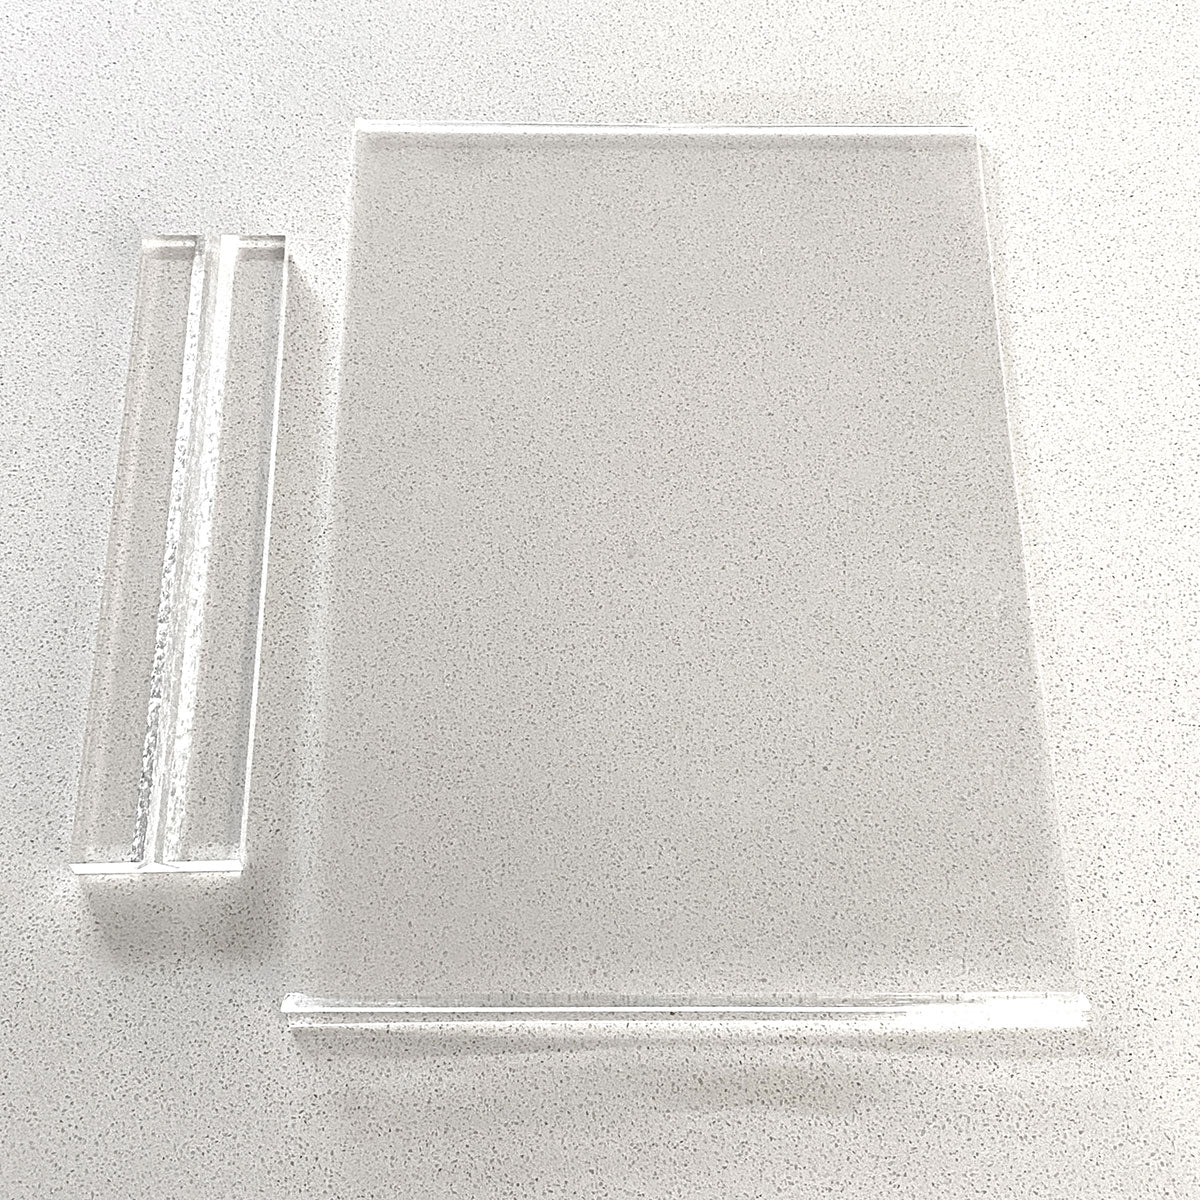 Clear Acrylic Photo Frame with Clear Base, showing all components laid flat on table